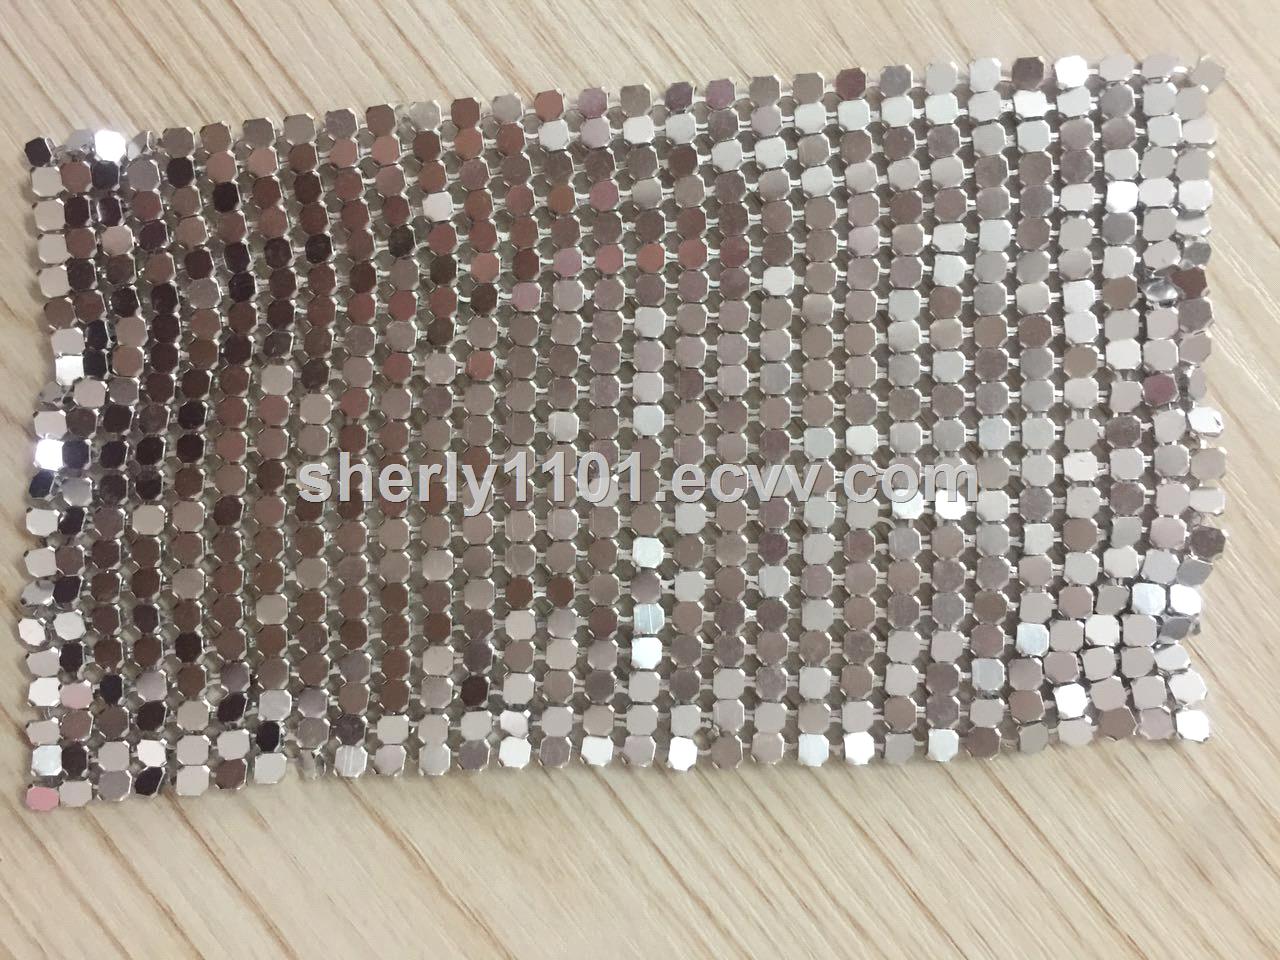 sequin fabricaluminum material metal clothdecorative wire mesh curtain for room partition screen